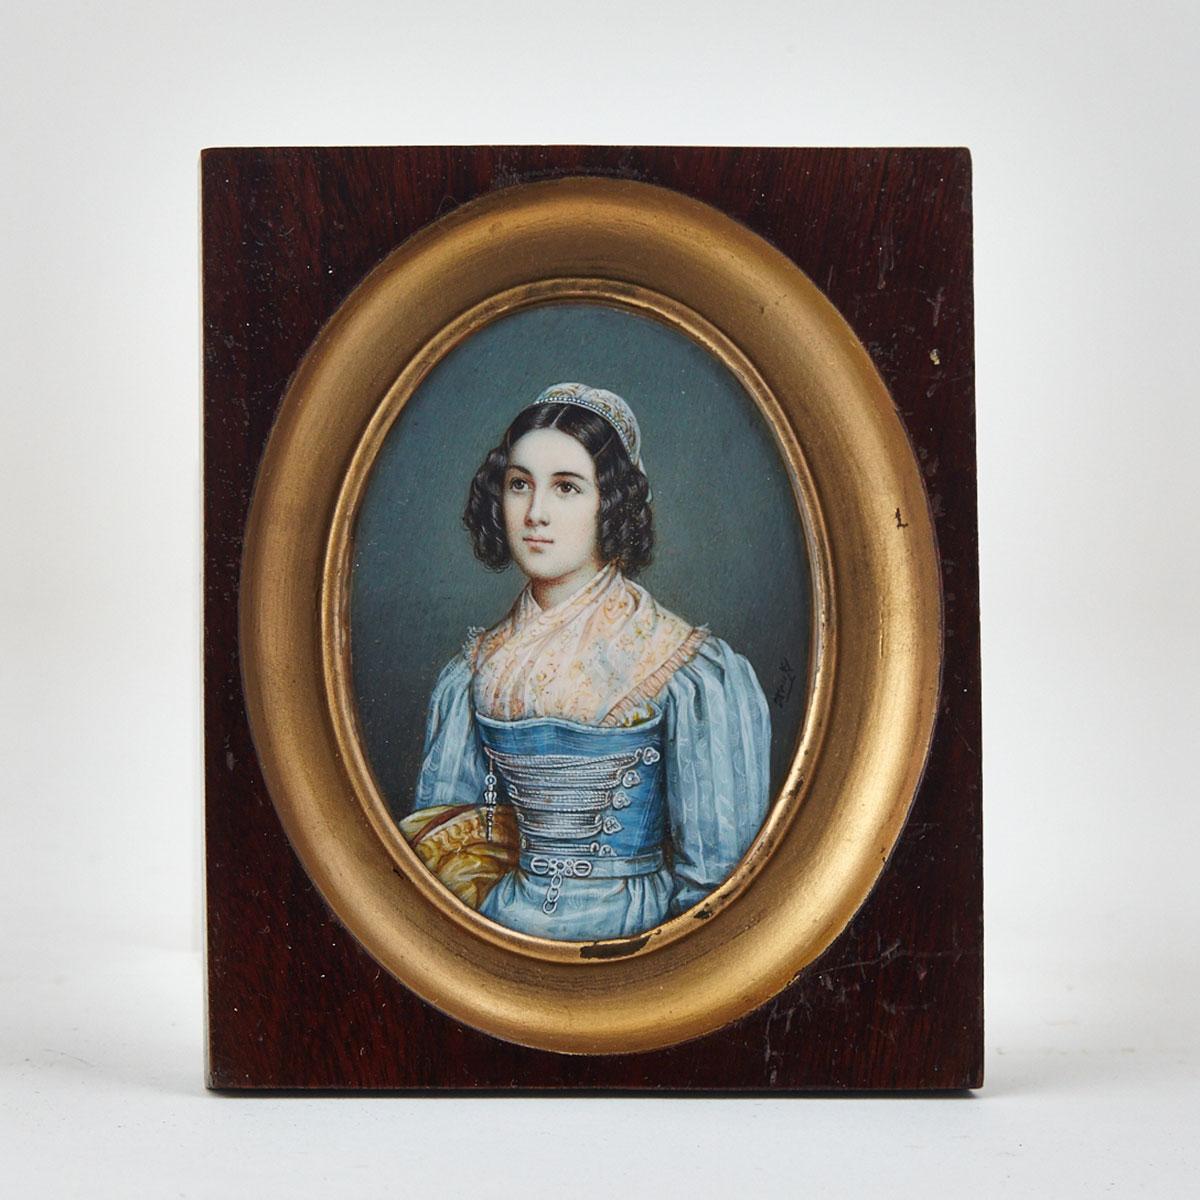 Continental Portrait Miniature of a Young Woman, early 19th century